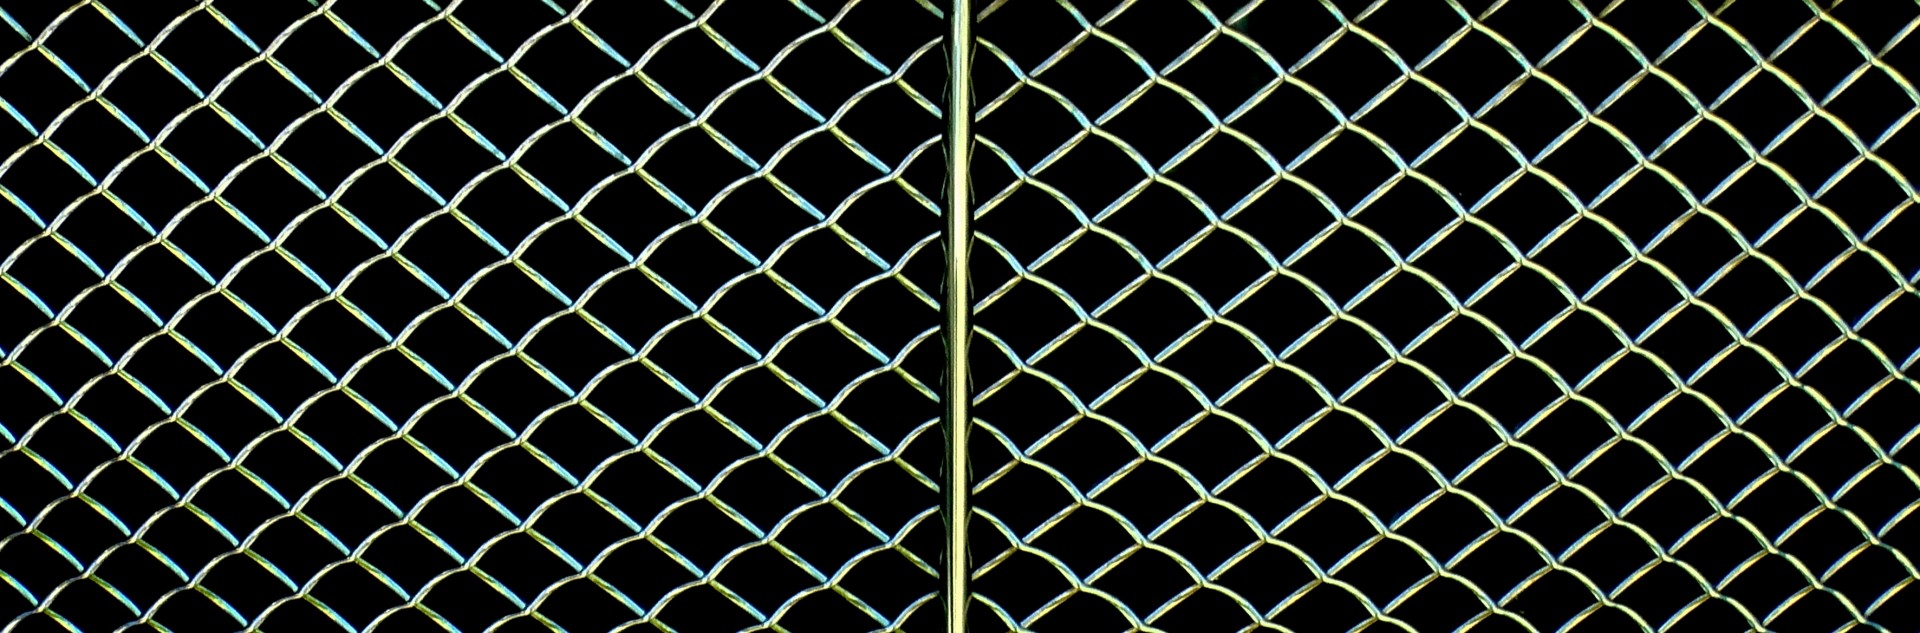 Bentley Coupe Grille Background